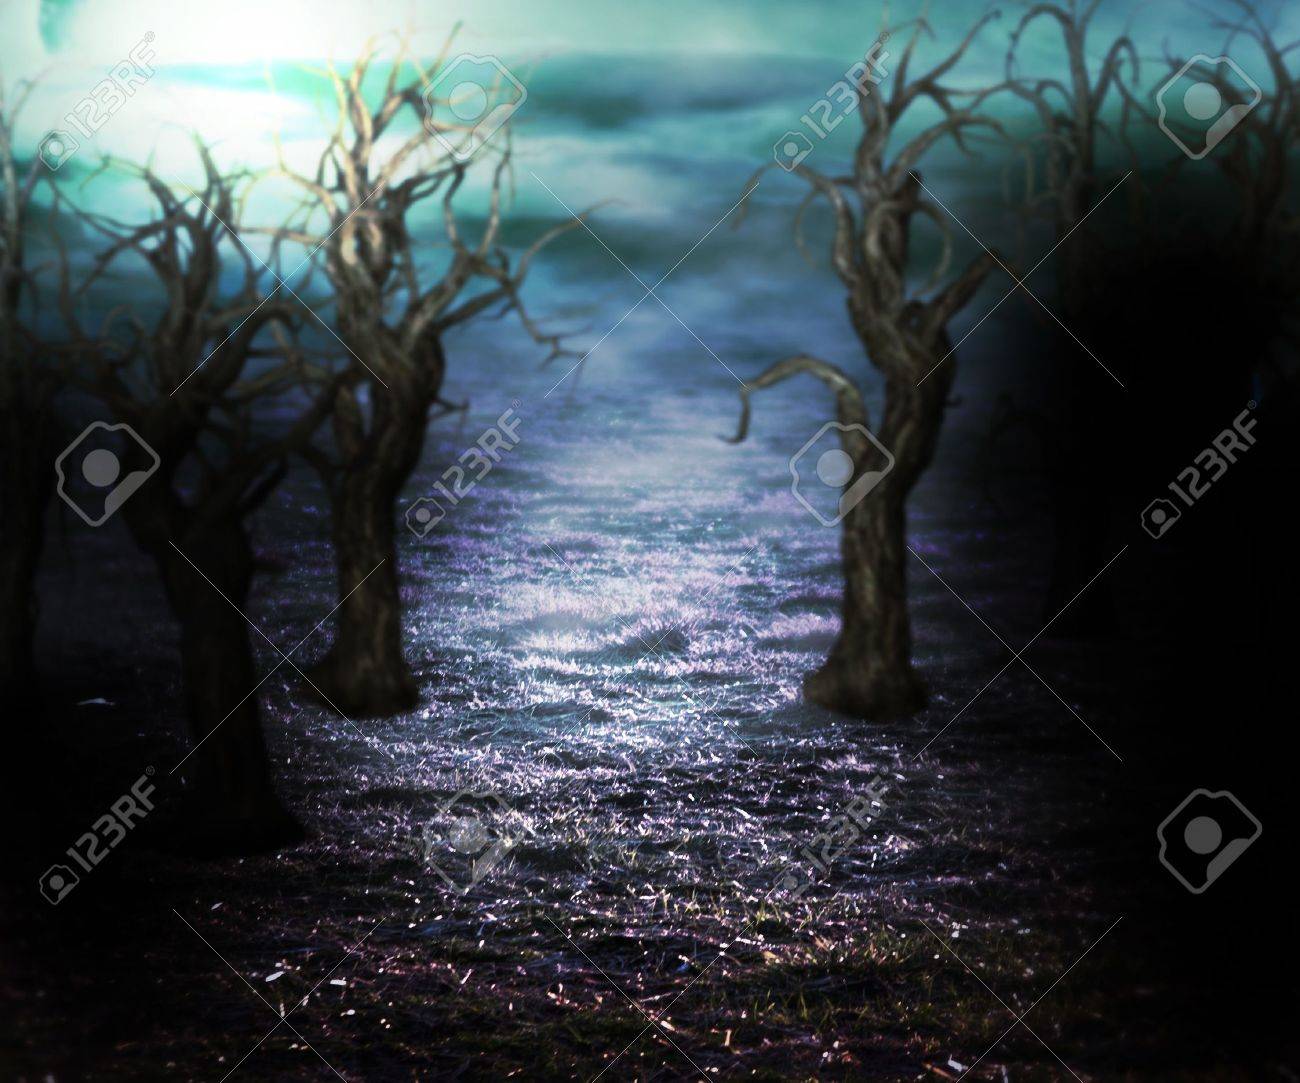 Dark Fantasy Background Stock Photo Picture And Royalty